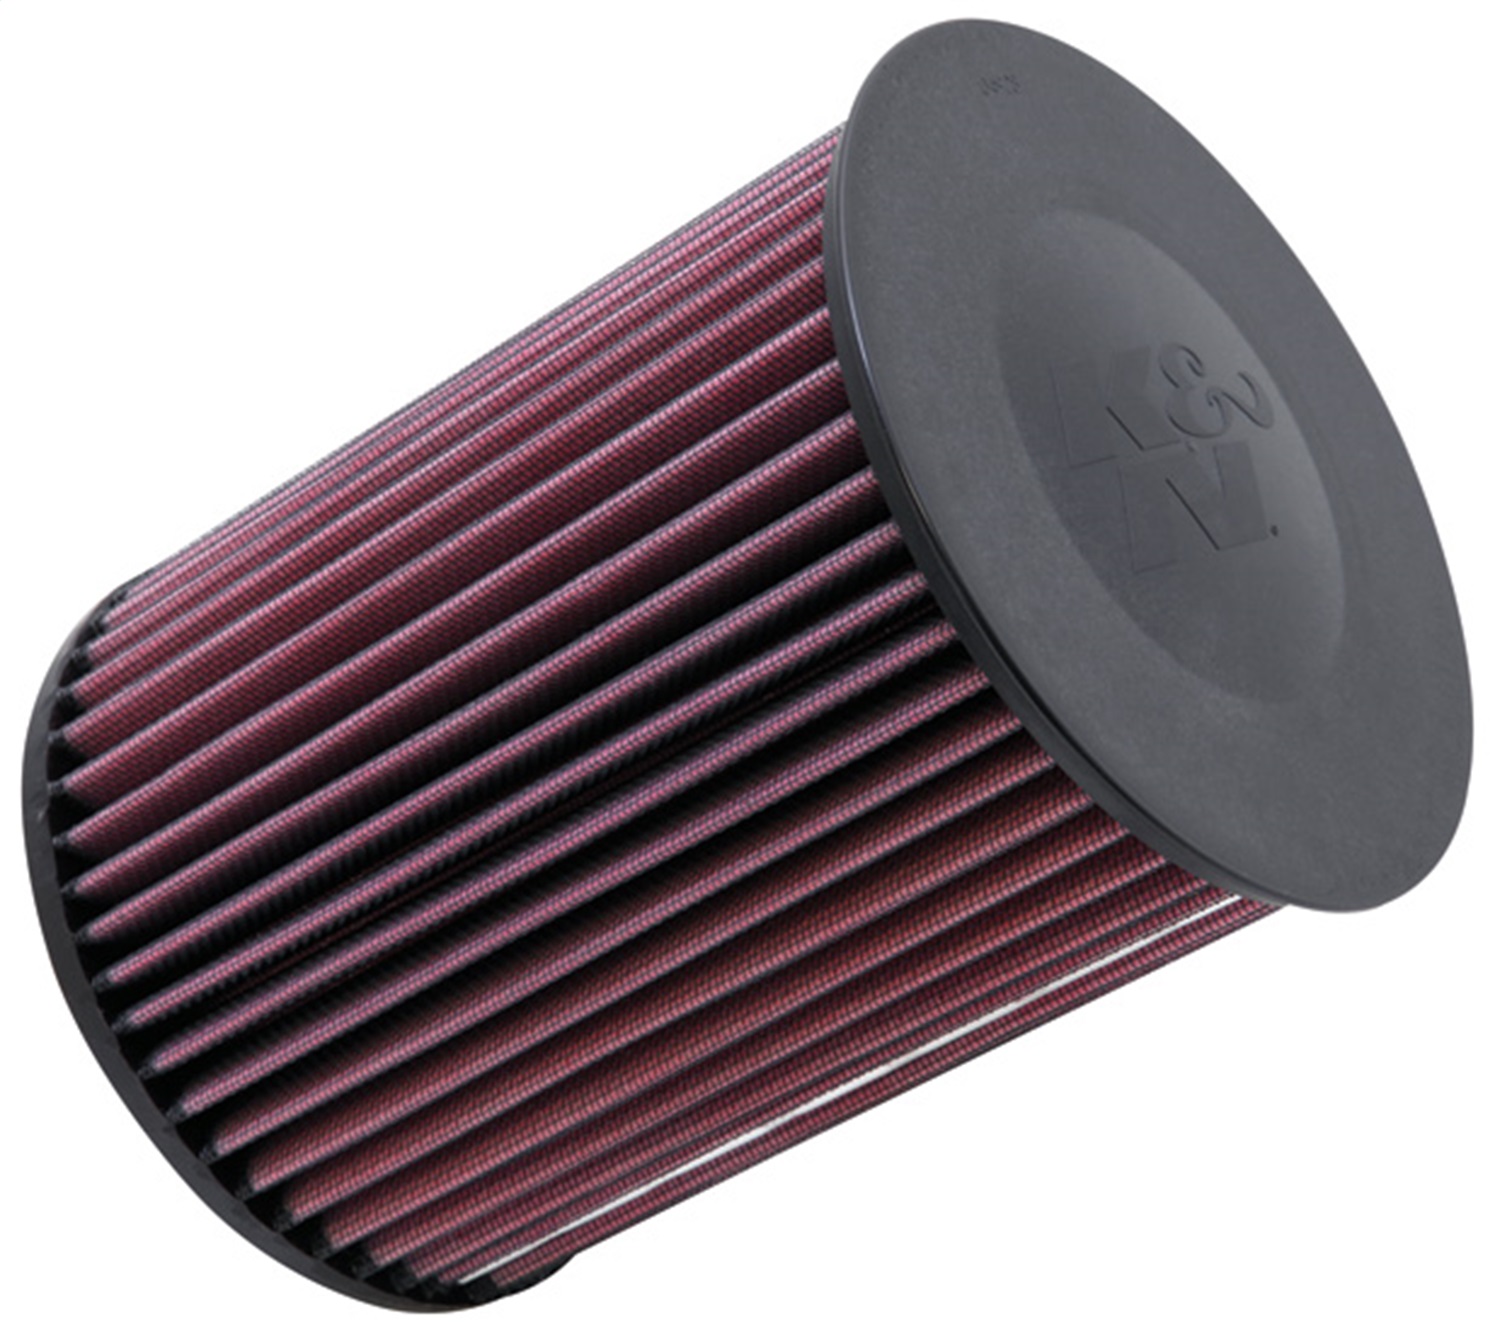 K&N Filters K&N Filters E-2993 Air Filter Fits 12-15 Escape Focus MKC Transit Connect